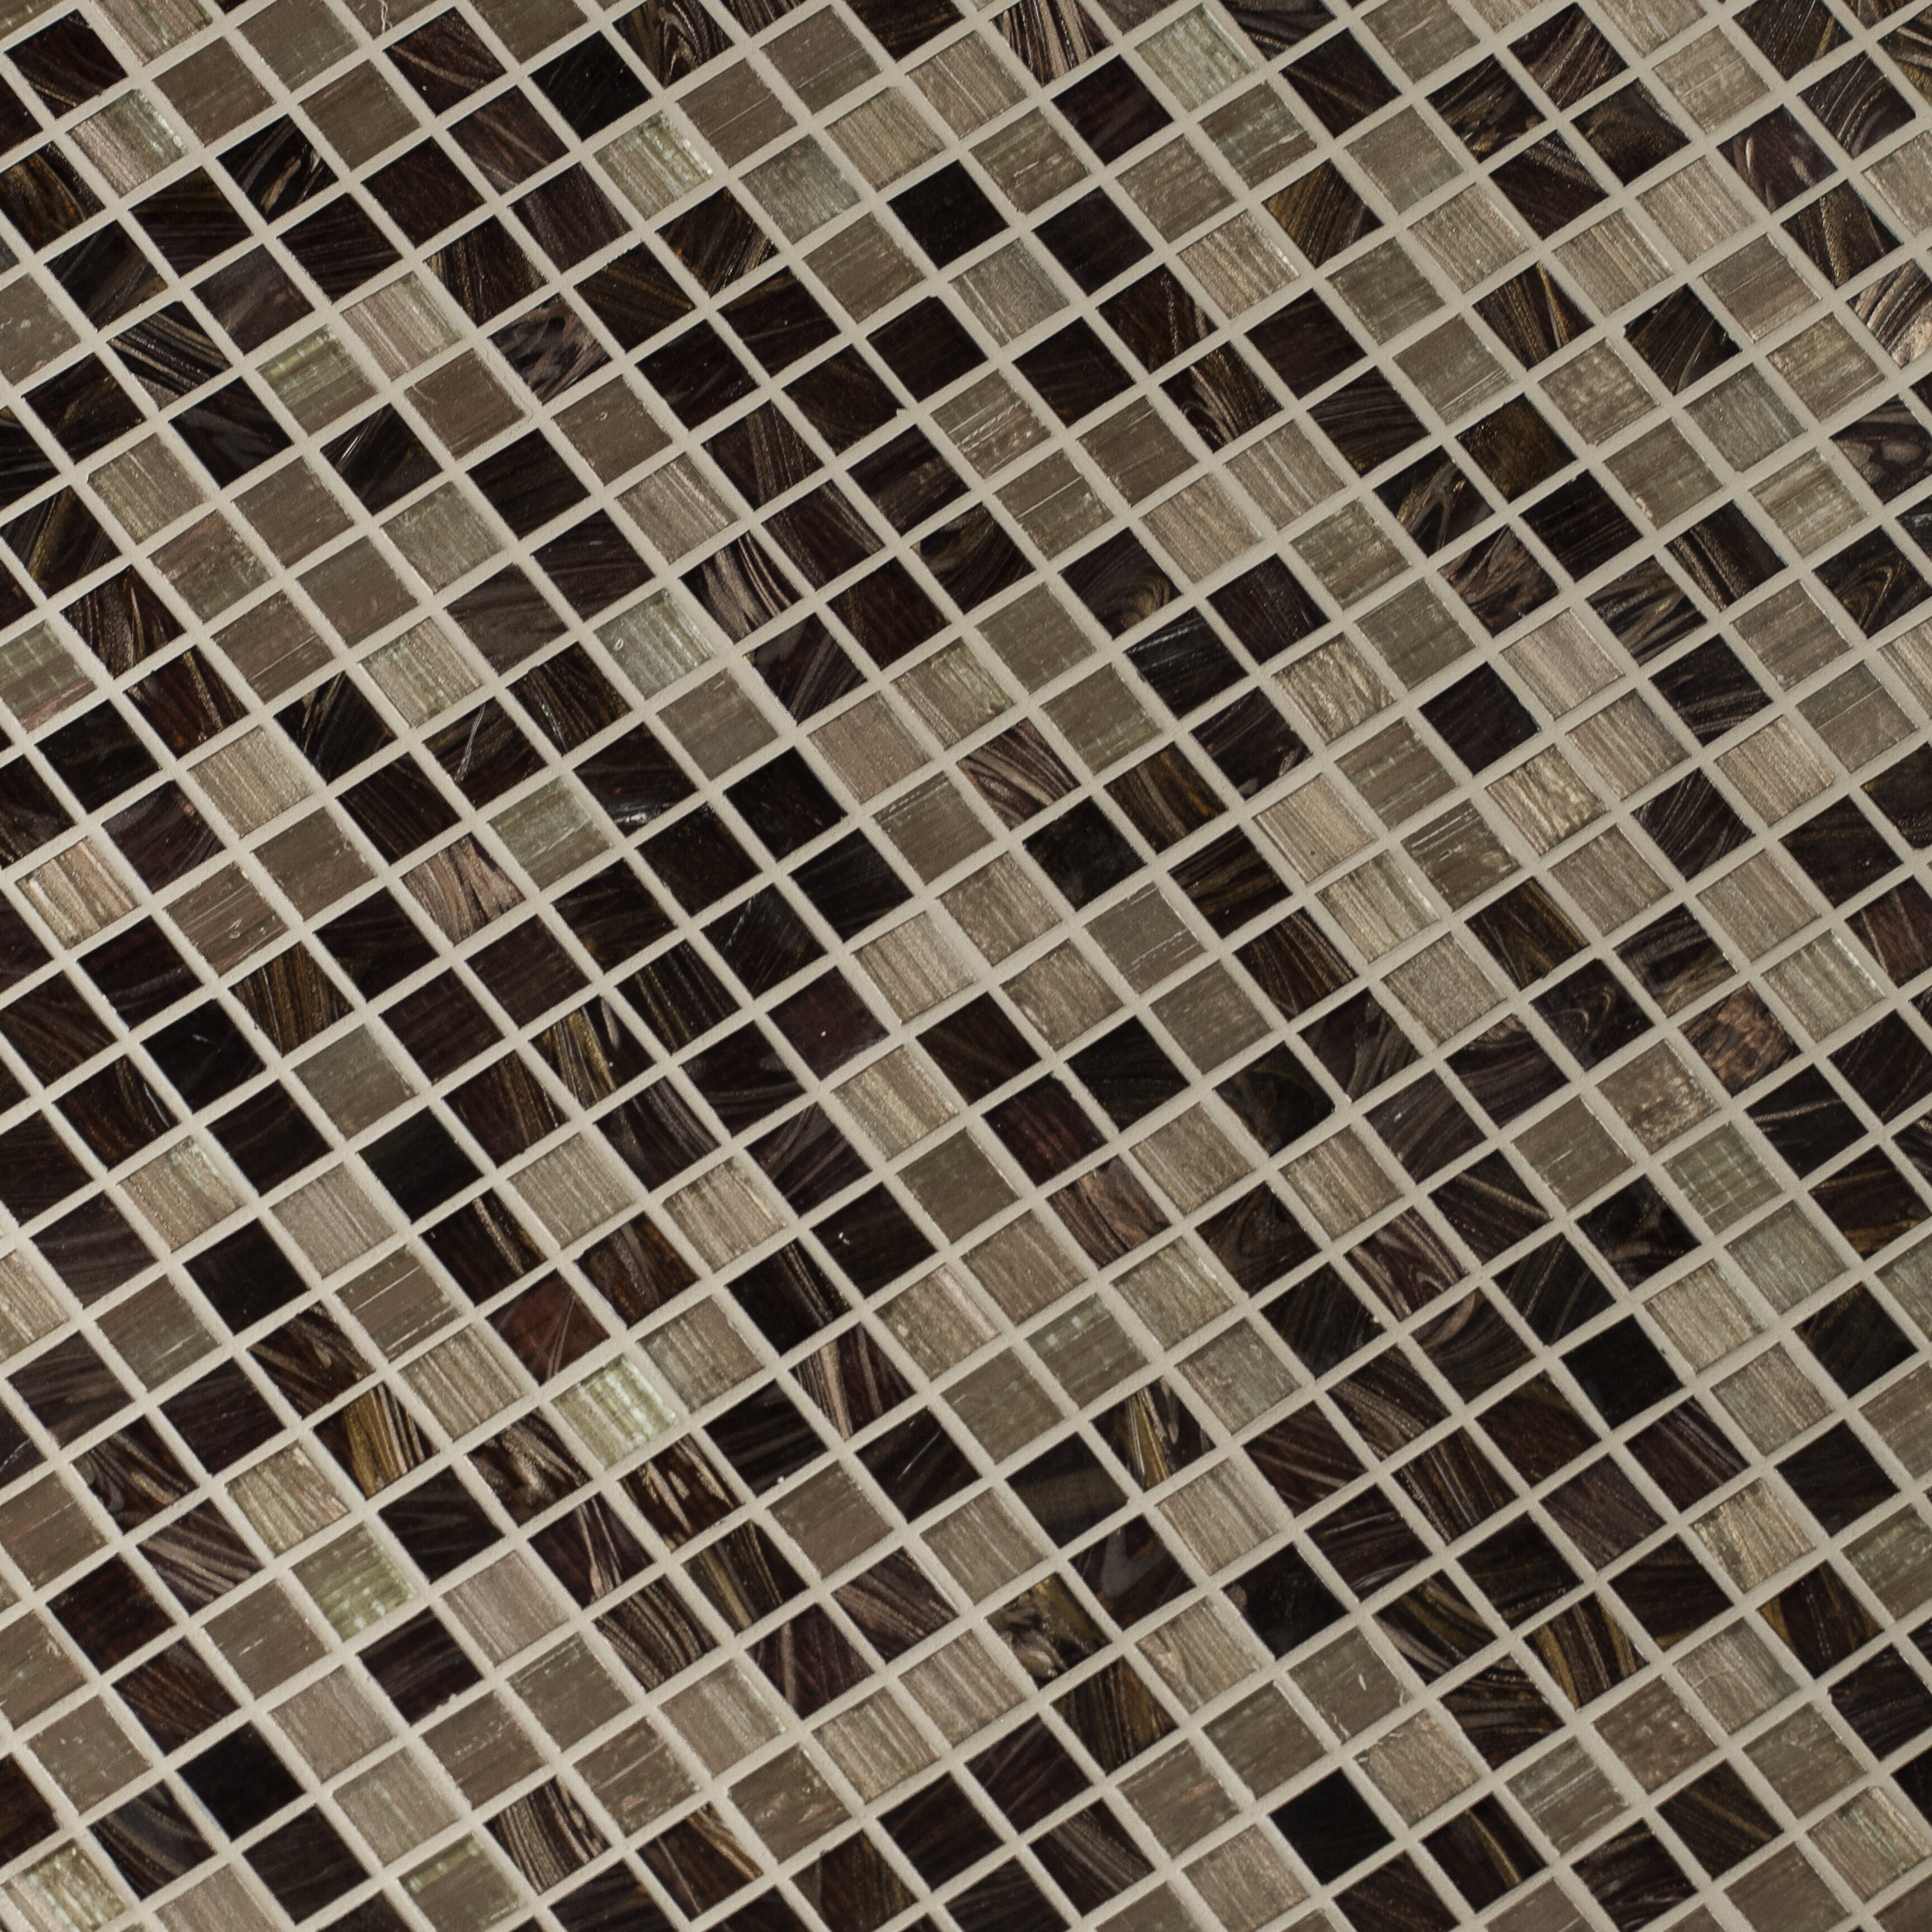 TEXTURED 3-MIRROR MIX - Loose Tiles Stained Glass Mosaic Supply M4